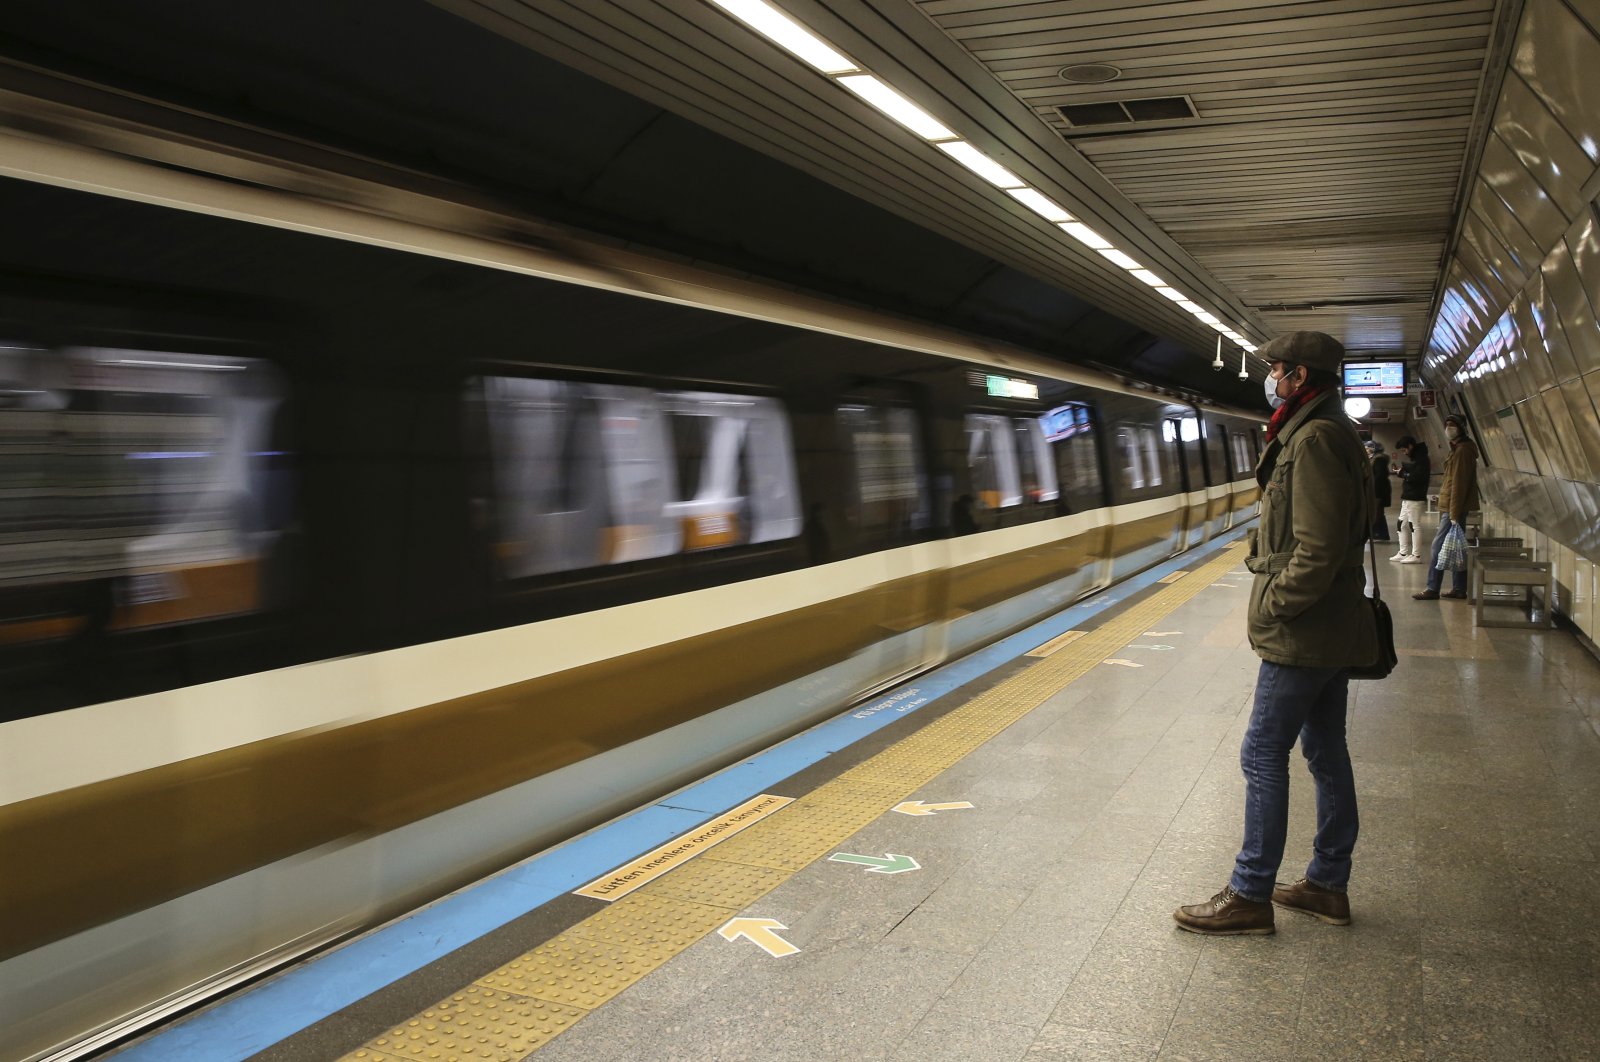 A commuter wears a mask in an underground station during the coronavirus outbreak in central Istanbul, Friday, April 3, 2020. (AP Photo)